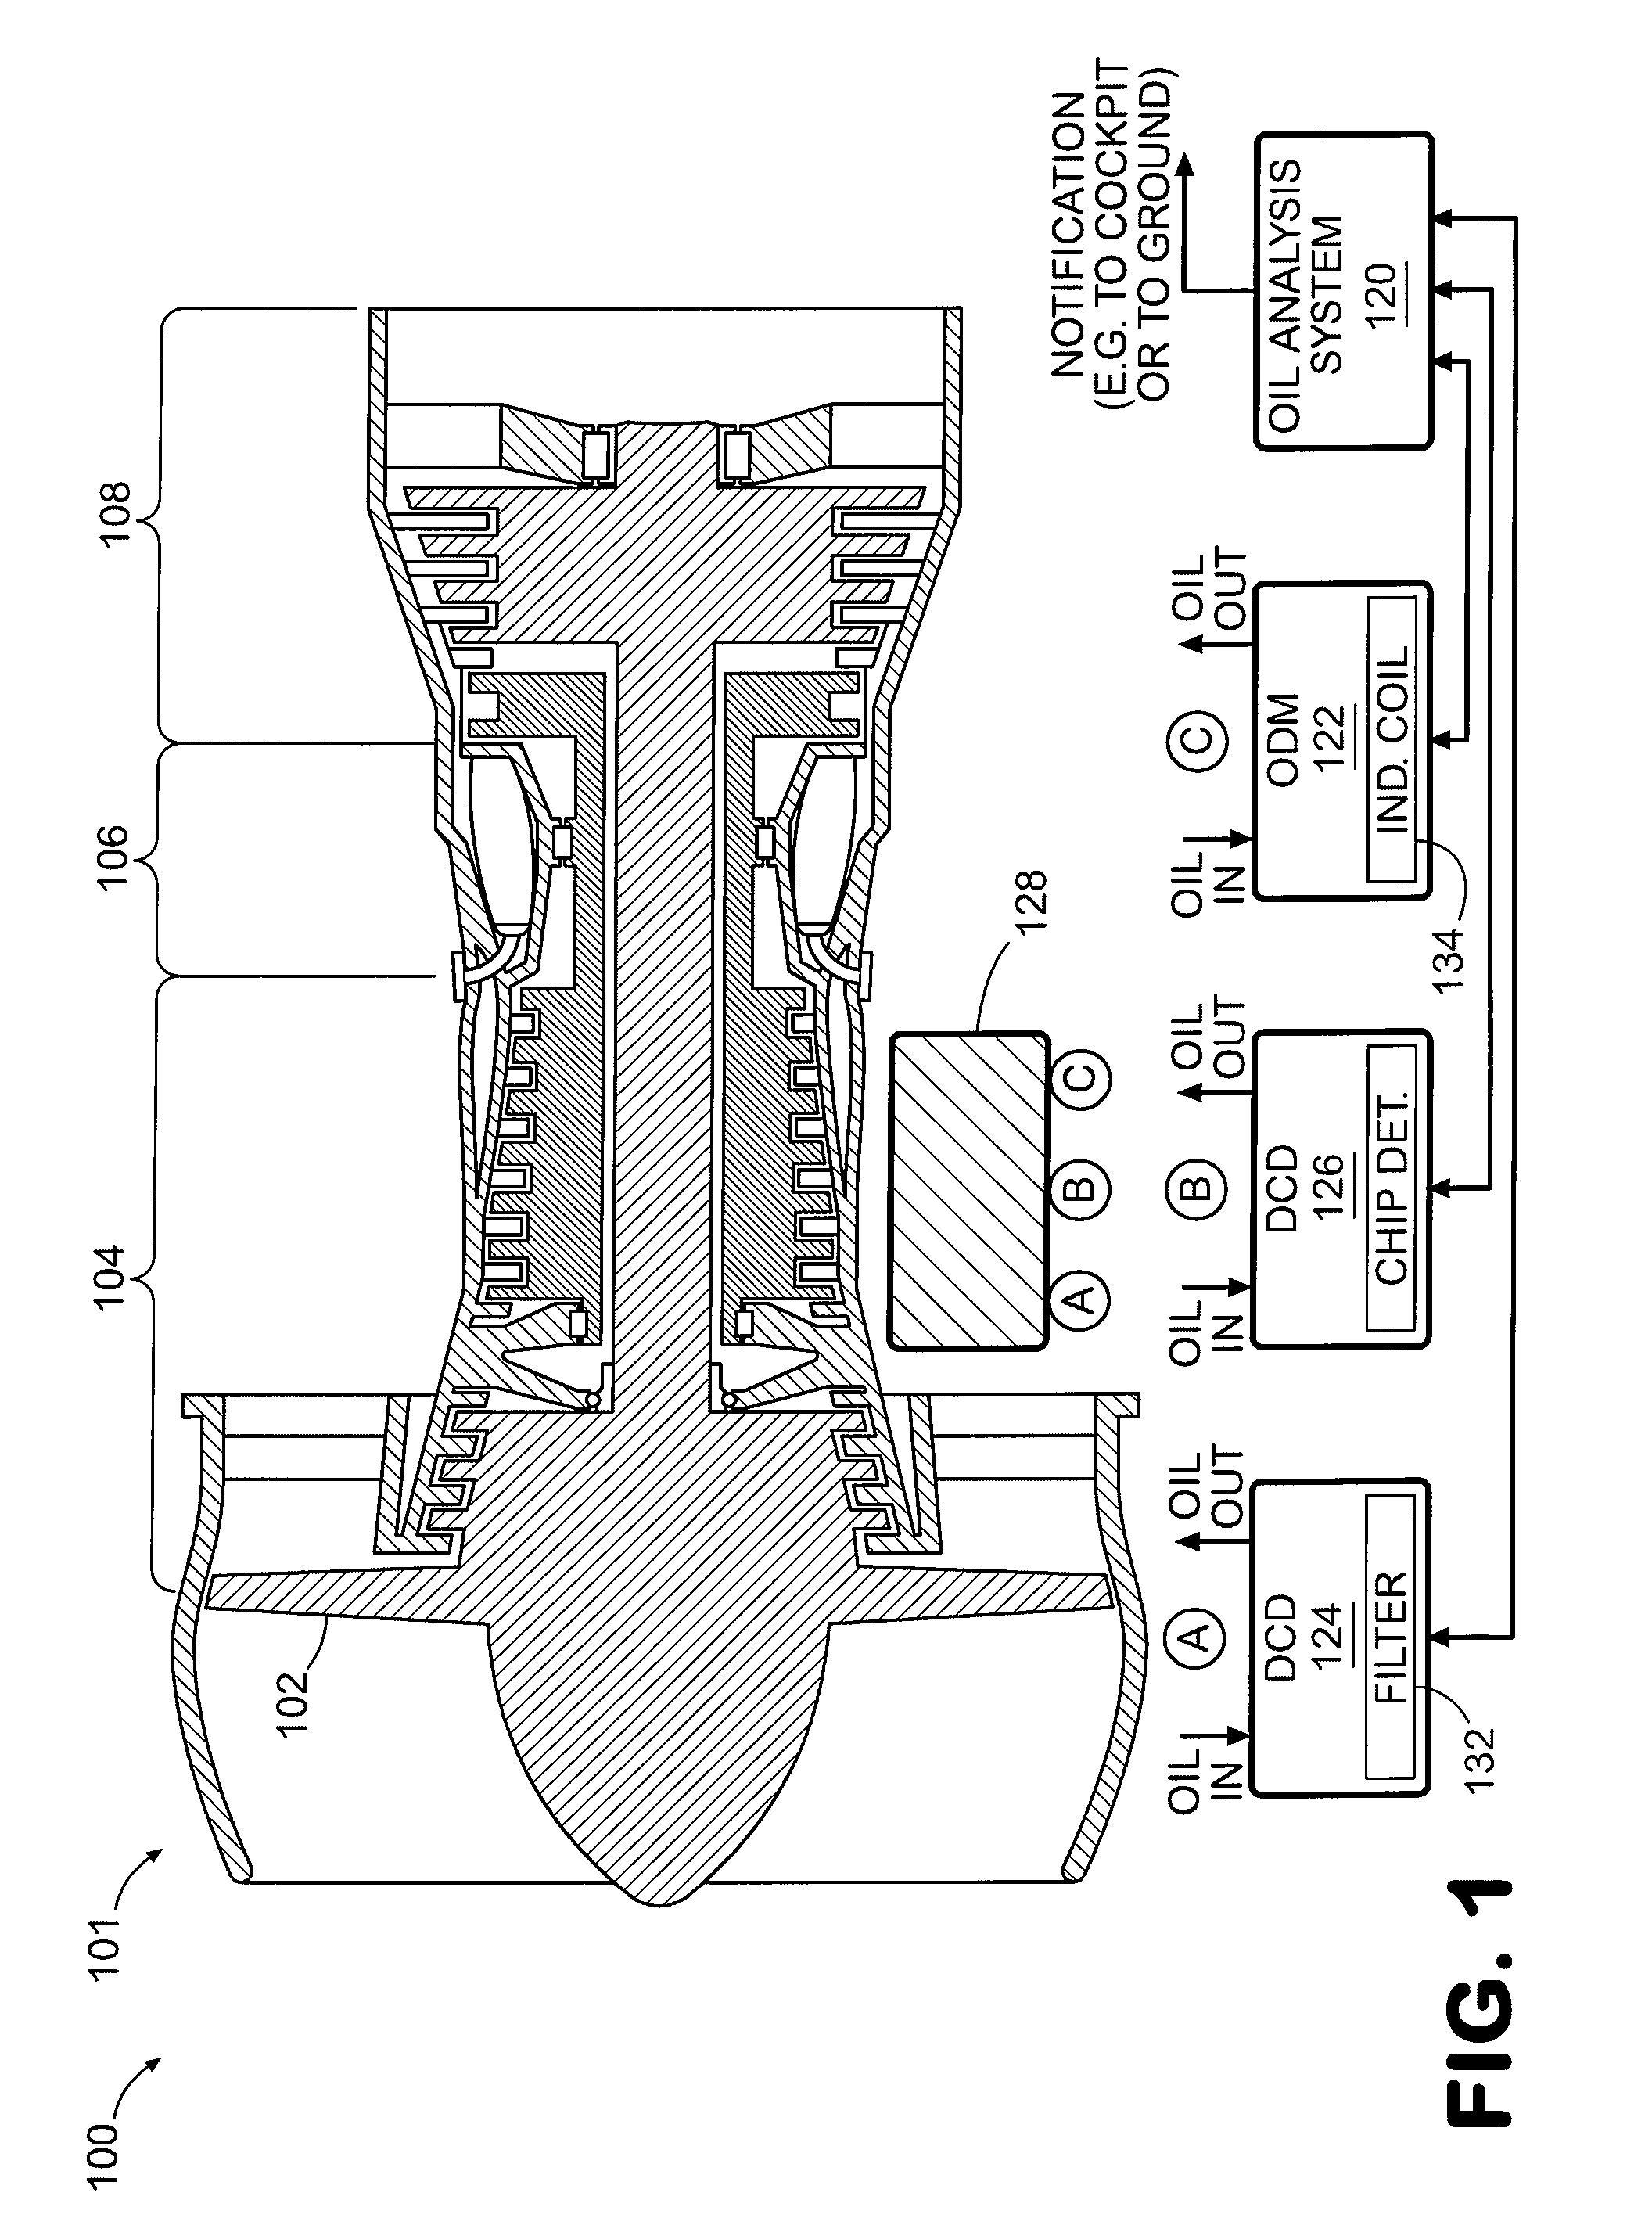 Systems and methods for monitoring gas turbine engines